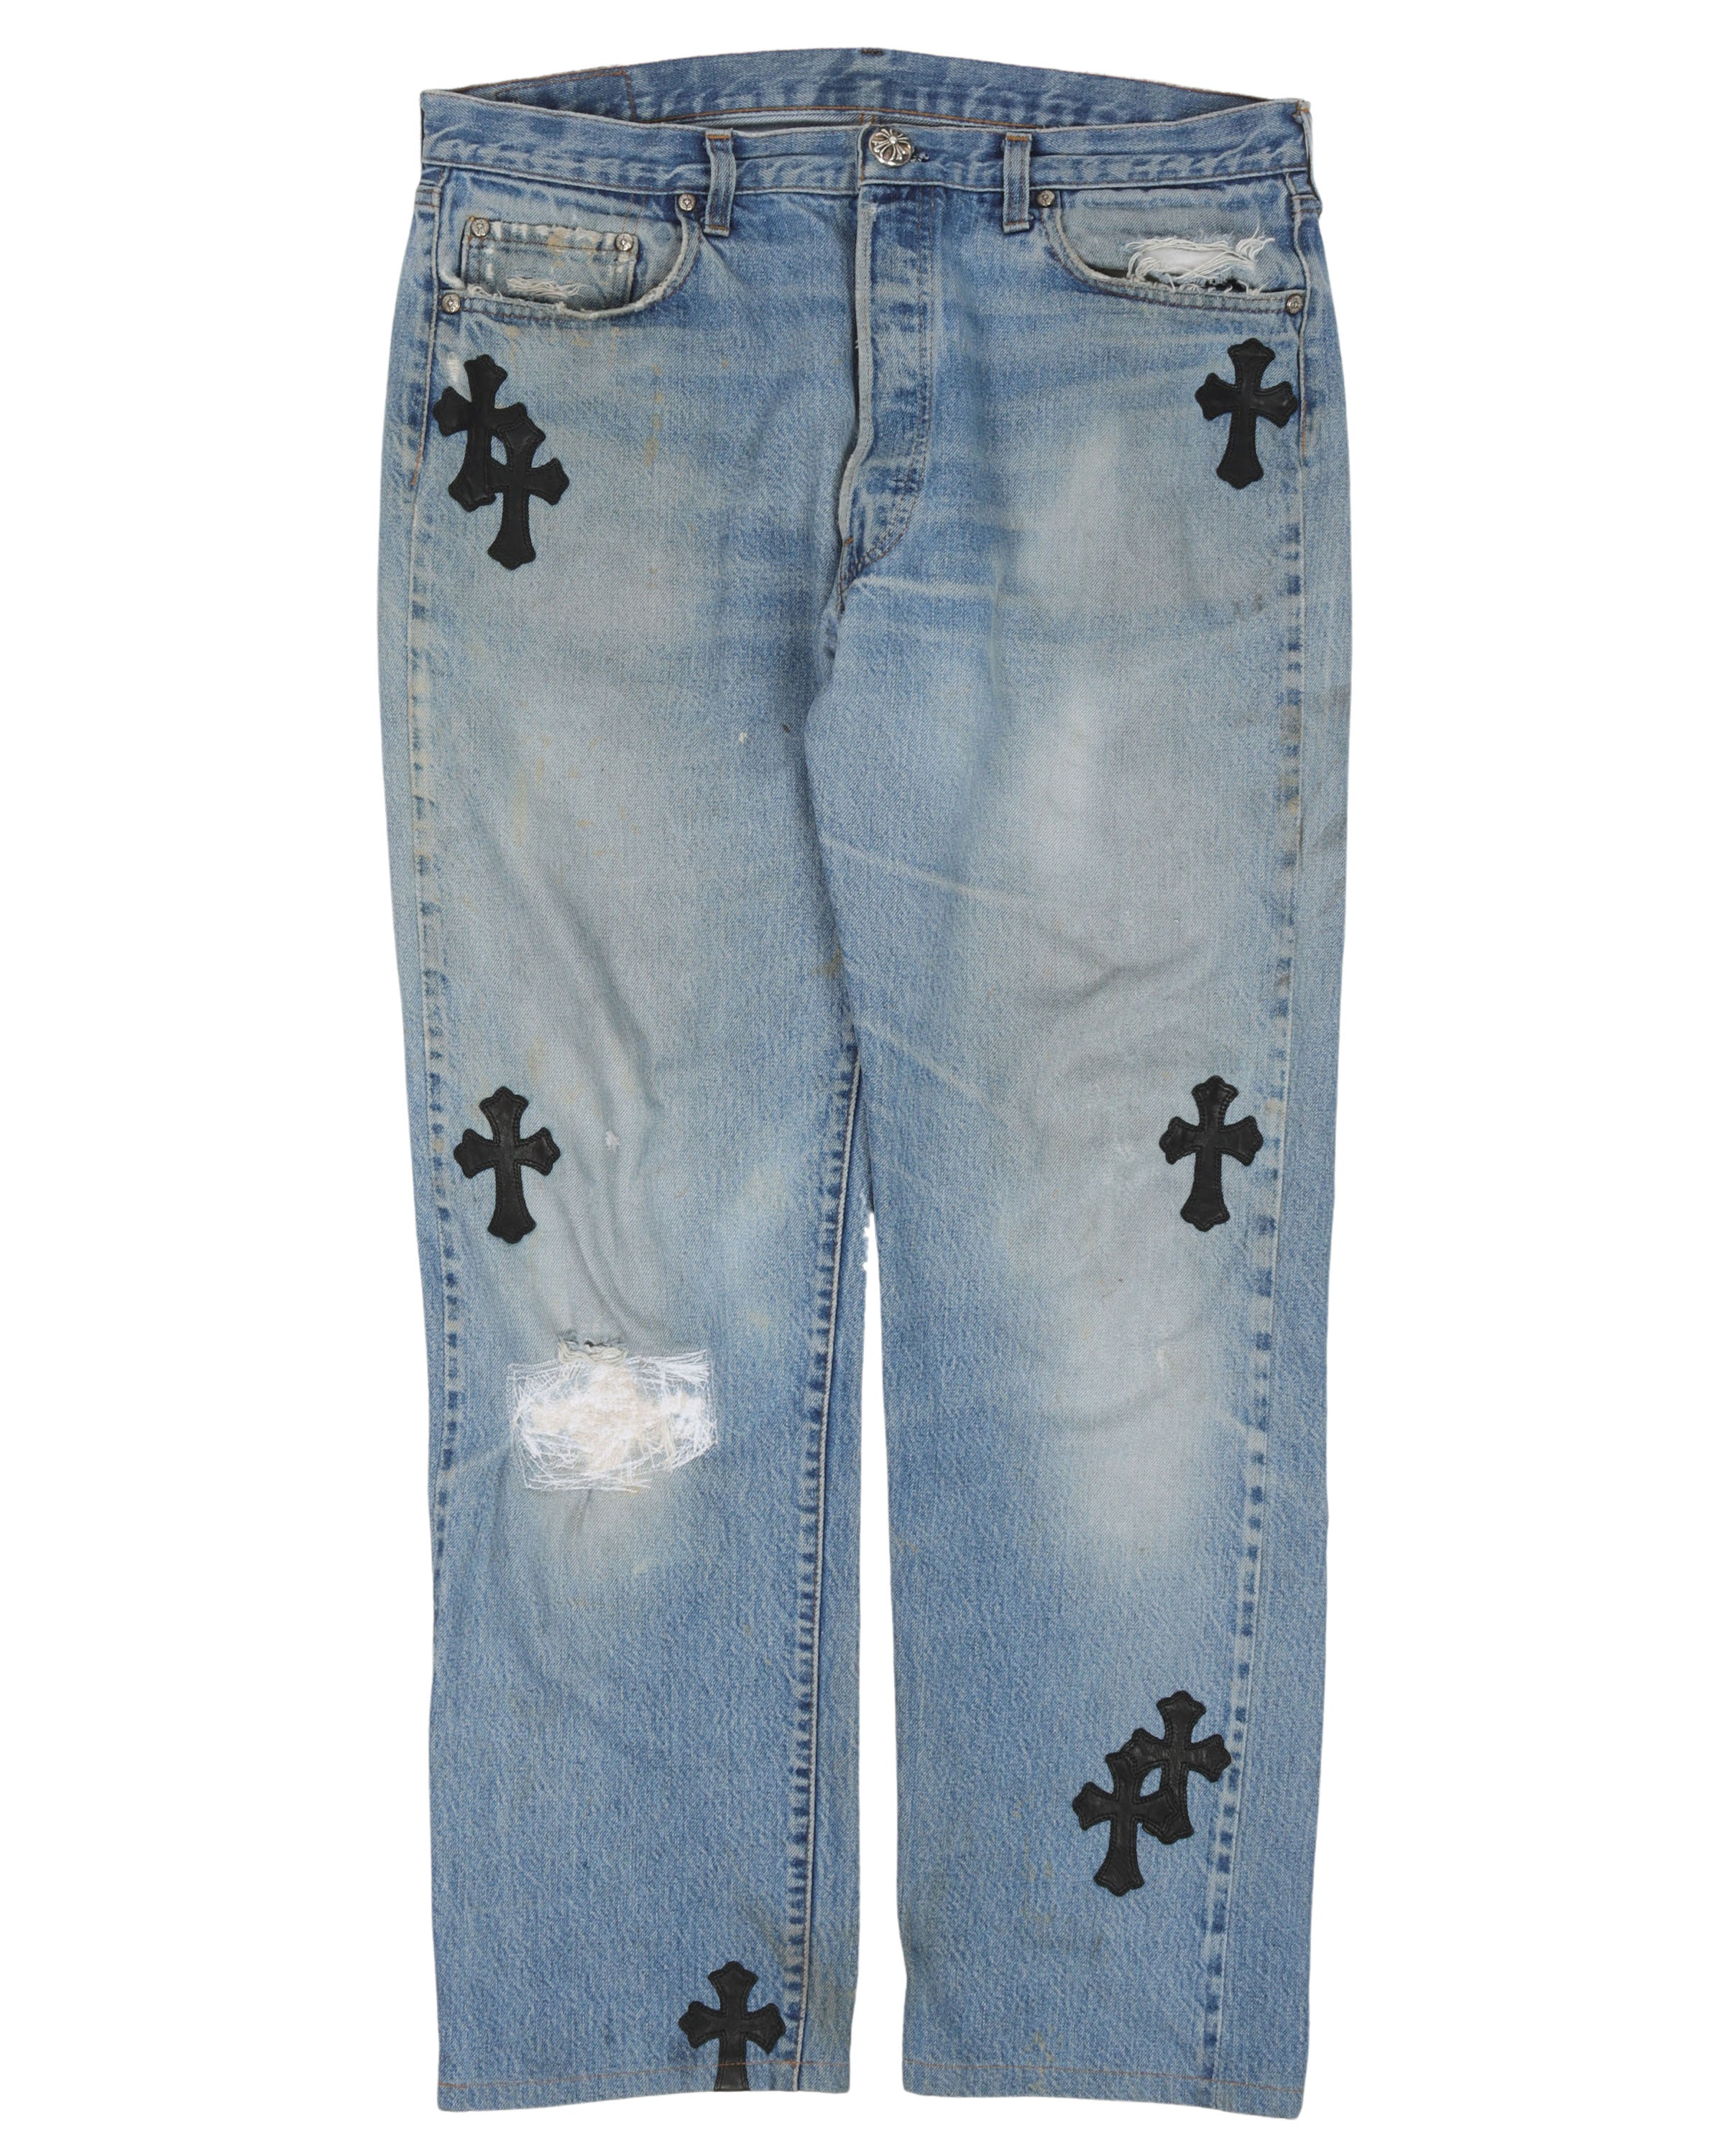 Chrome Hearts Repaired Levi's Cross Patch Jeans